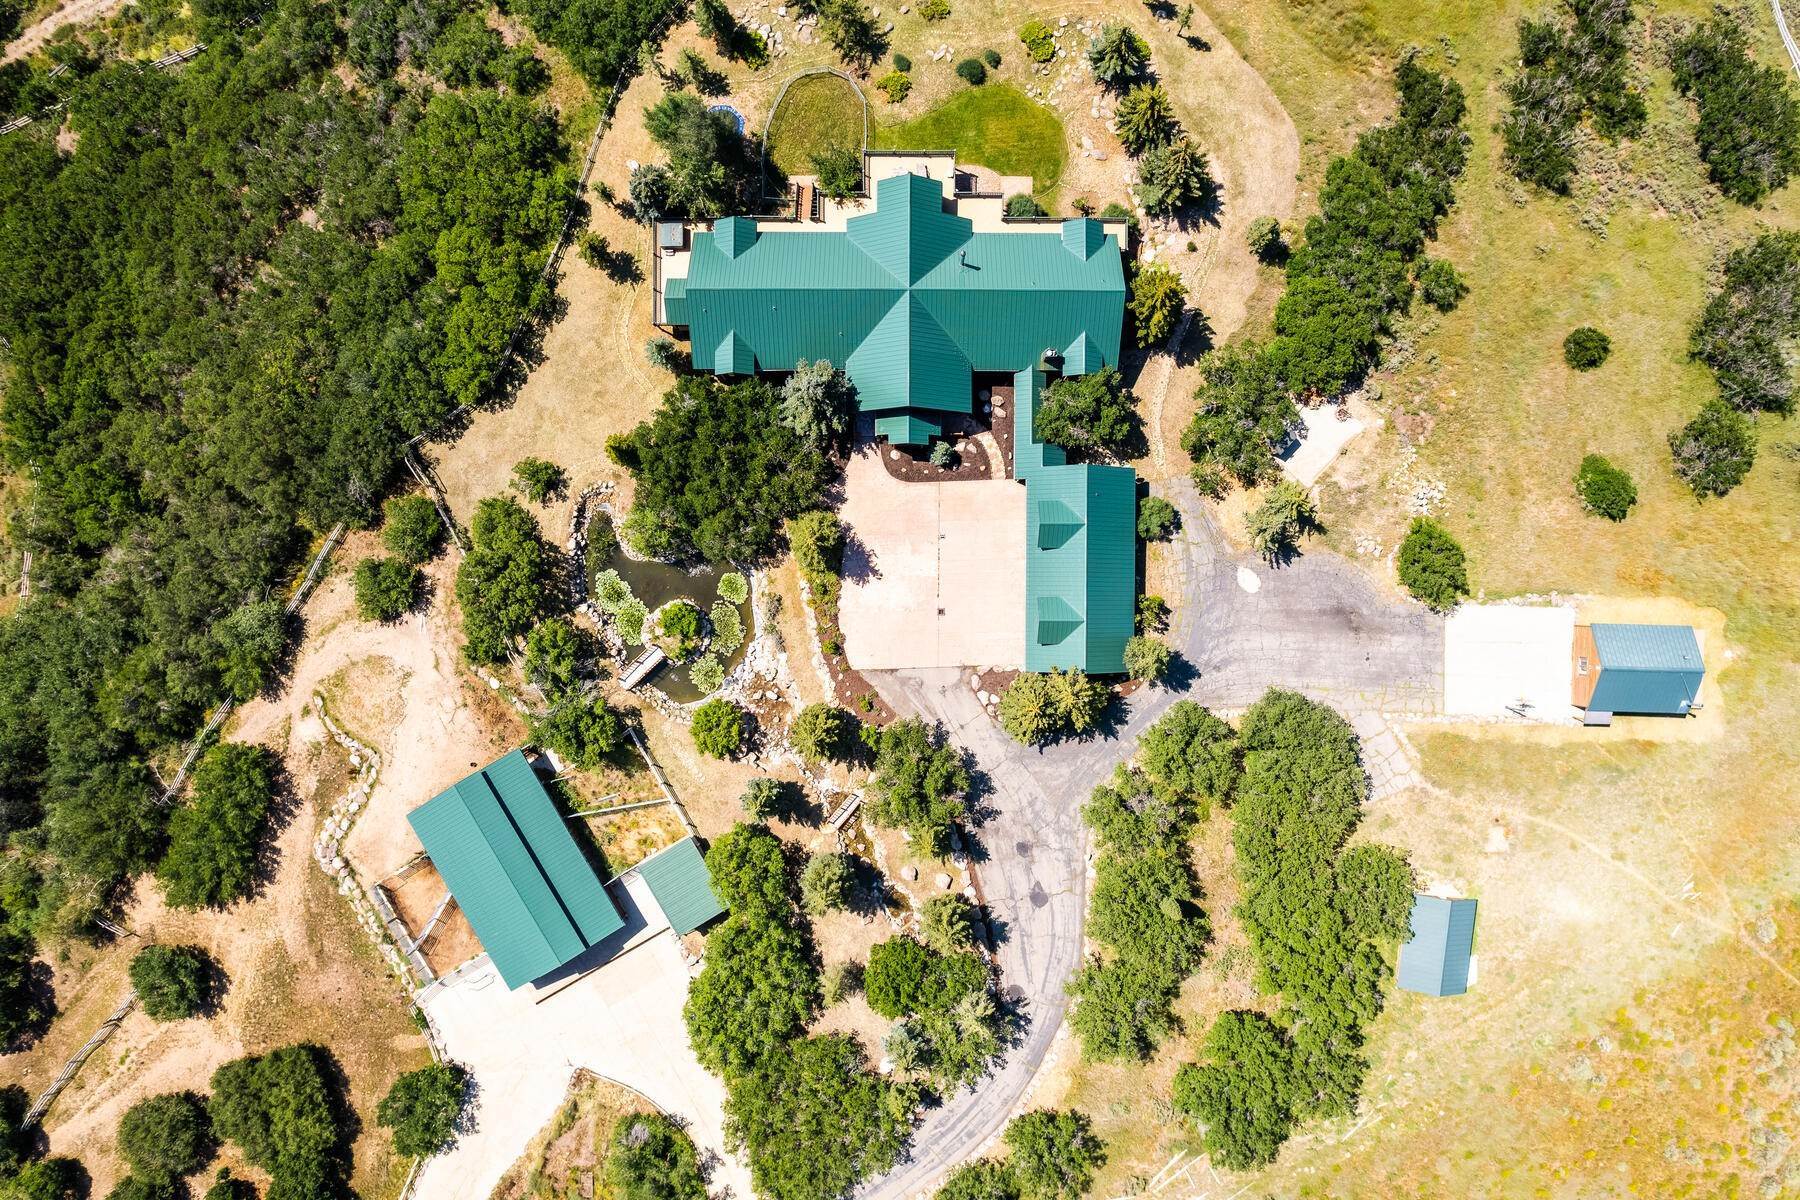 Single Family Homes for Sale at Park City Home on 20 Acres with Best Views, Pond & Guest House 331 Goshawk Ridge Rd Park City, Utah 84098 United States